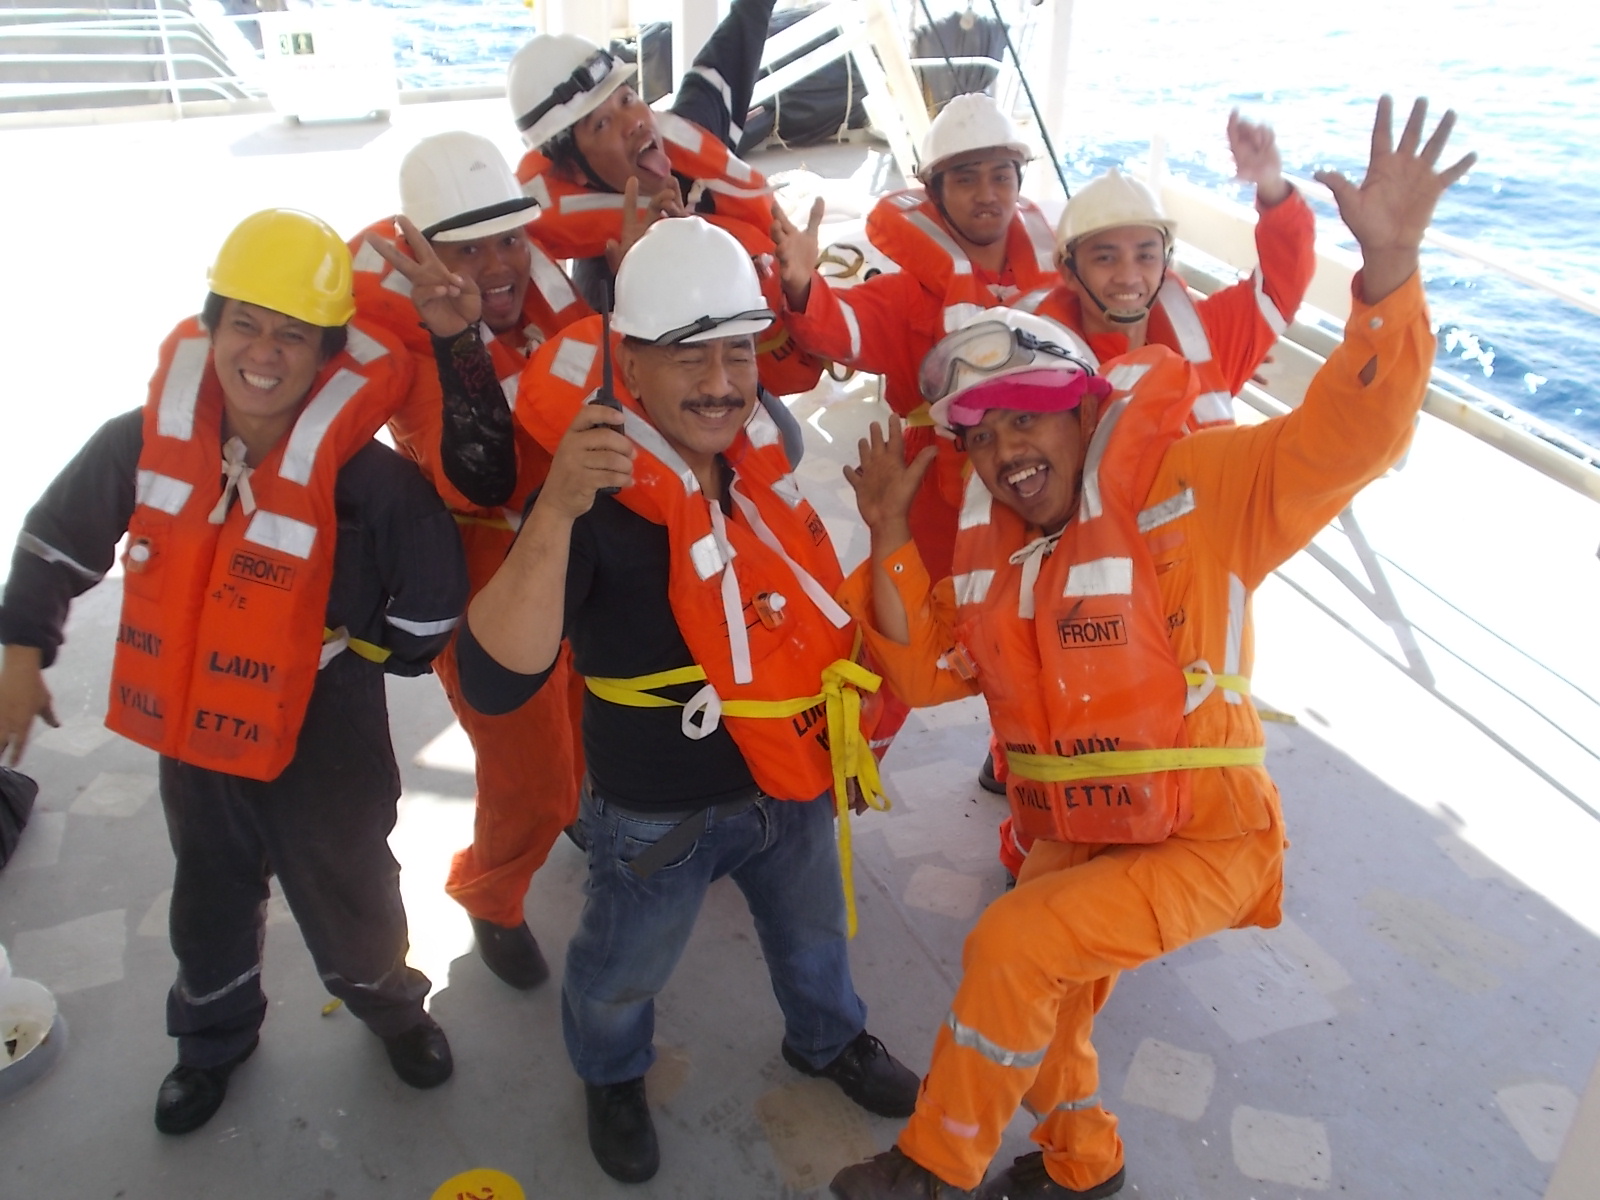 Seafarers wearing a lifejacket and making funny poses after a drill under the lifeboat.